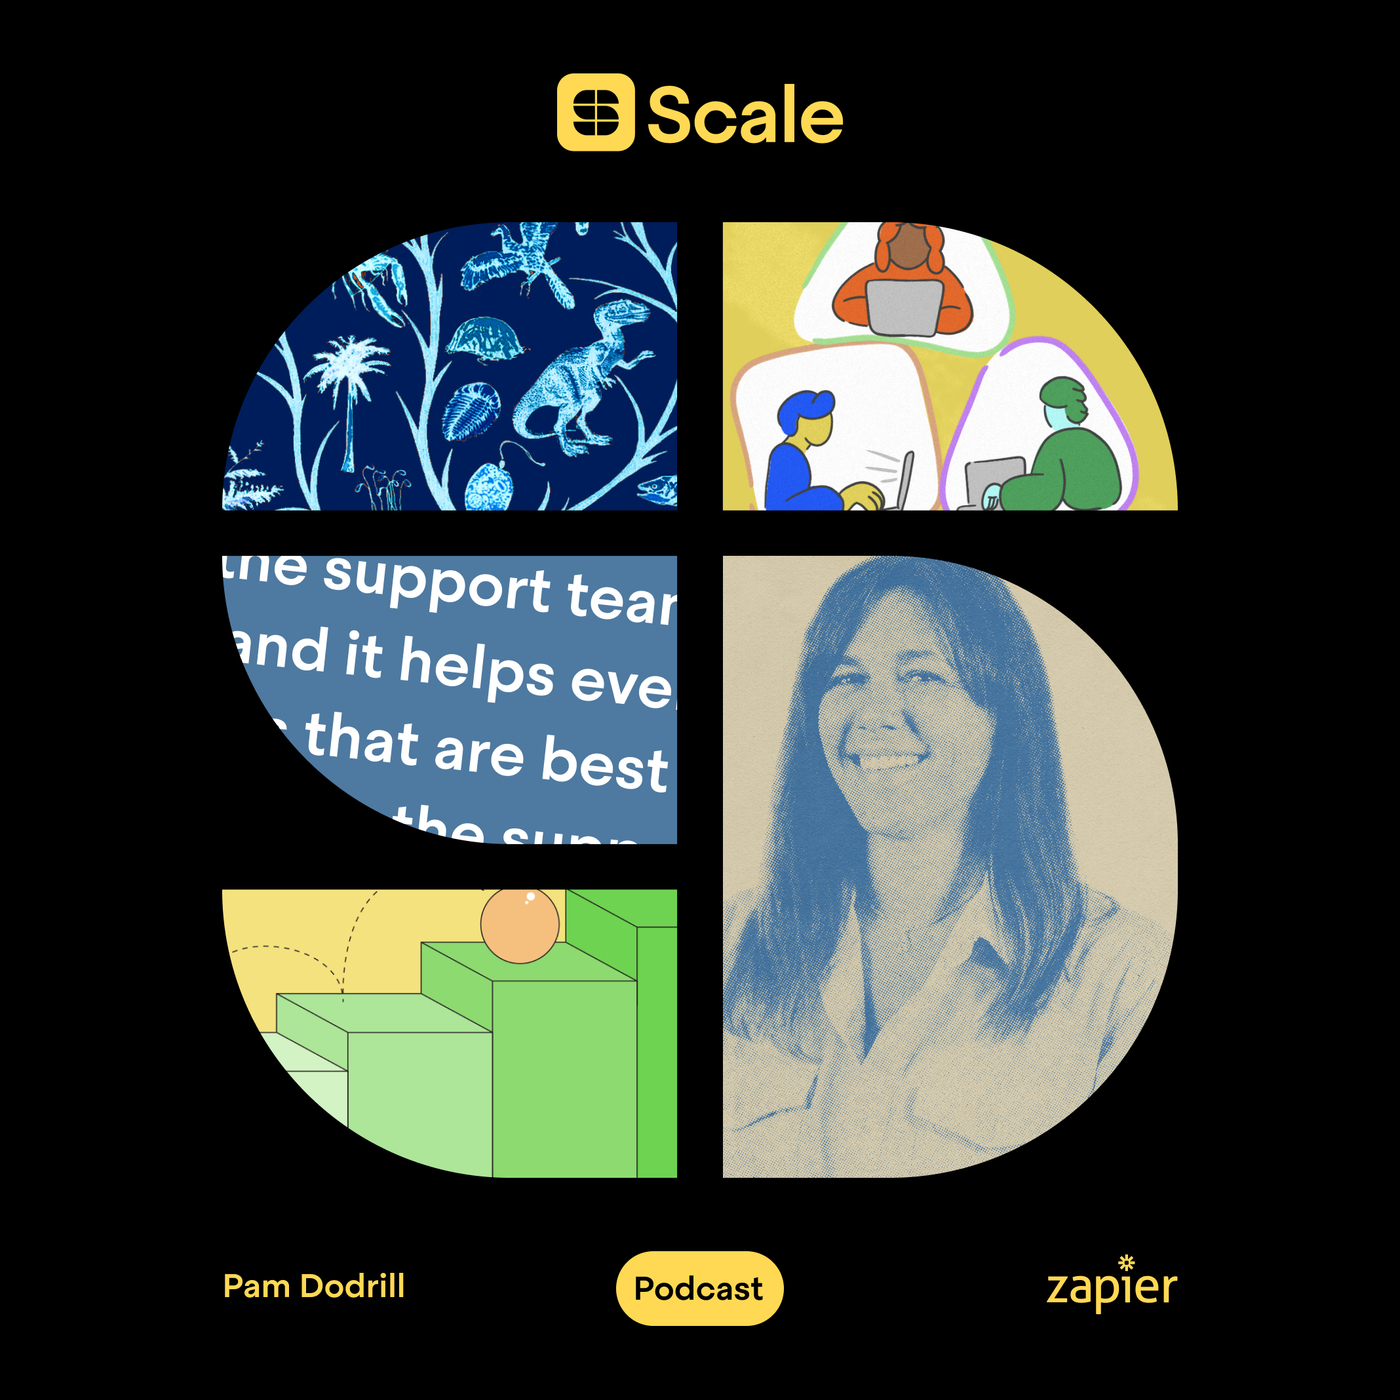 Scale: How Zapier supports 3 million users by investing in customer outcomes